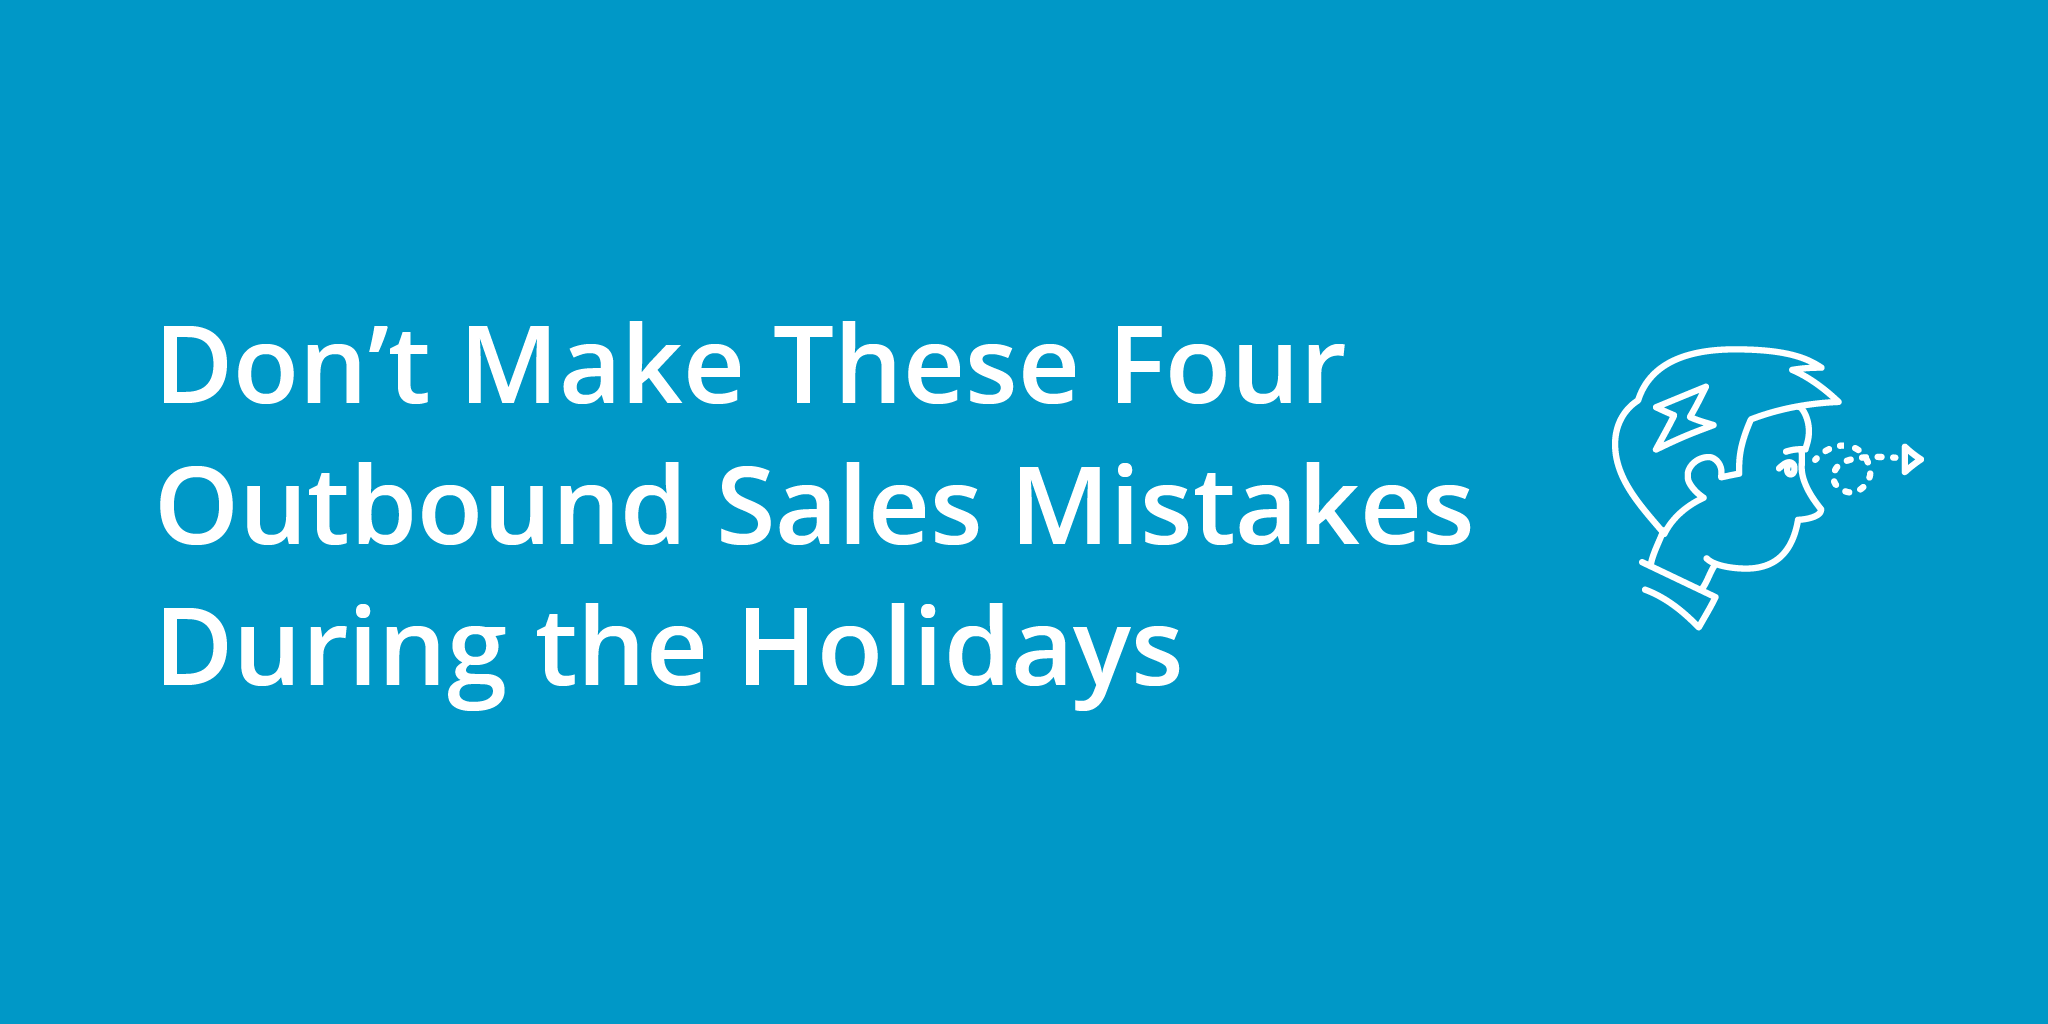 Don’t Make These 4 Outbound Sales Mistakes During the Holidays | Telephones for business